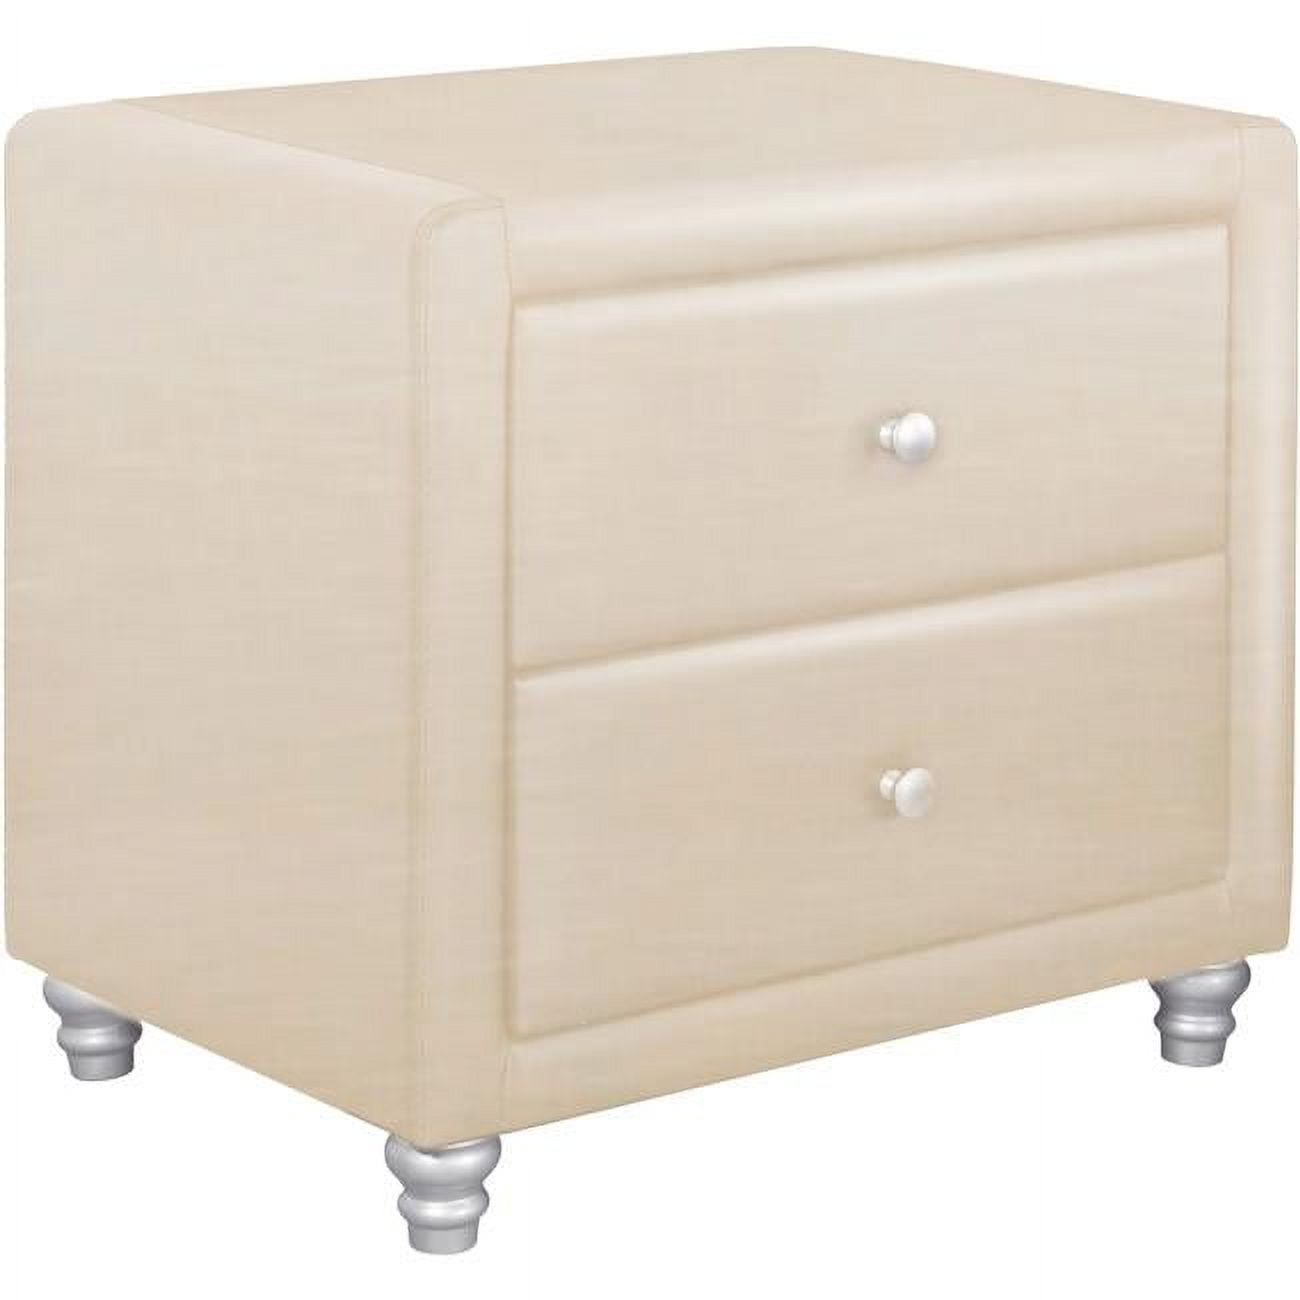 Hindes Beige Faux Leather 2-Drawer Nightstand with Brushed Nickel Pulls